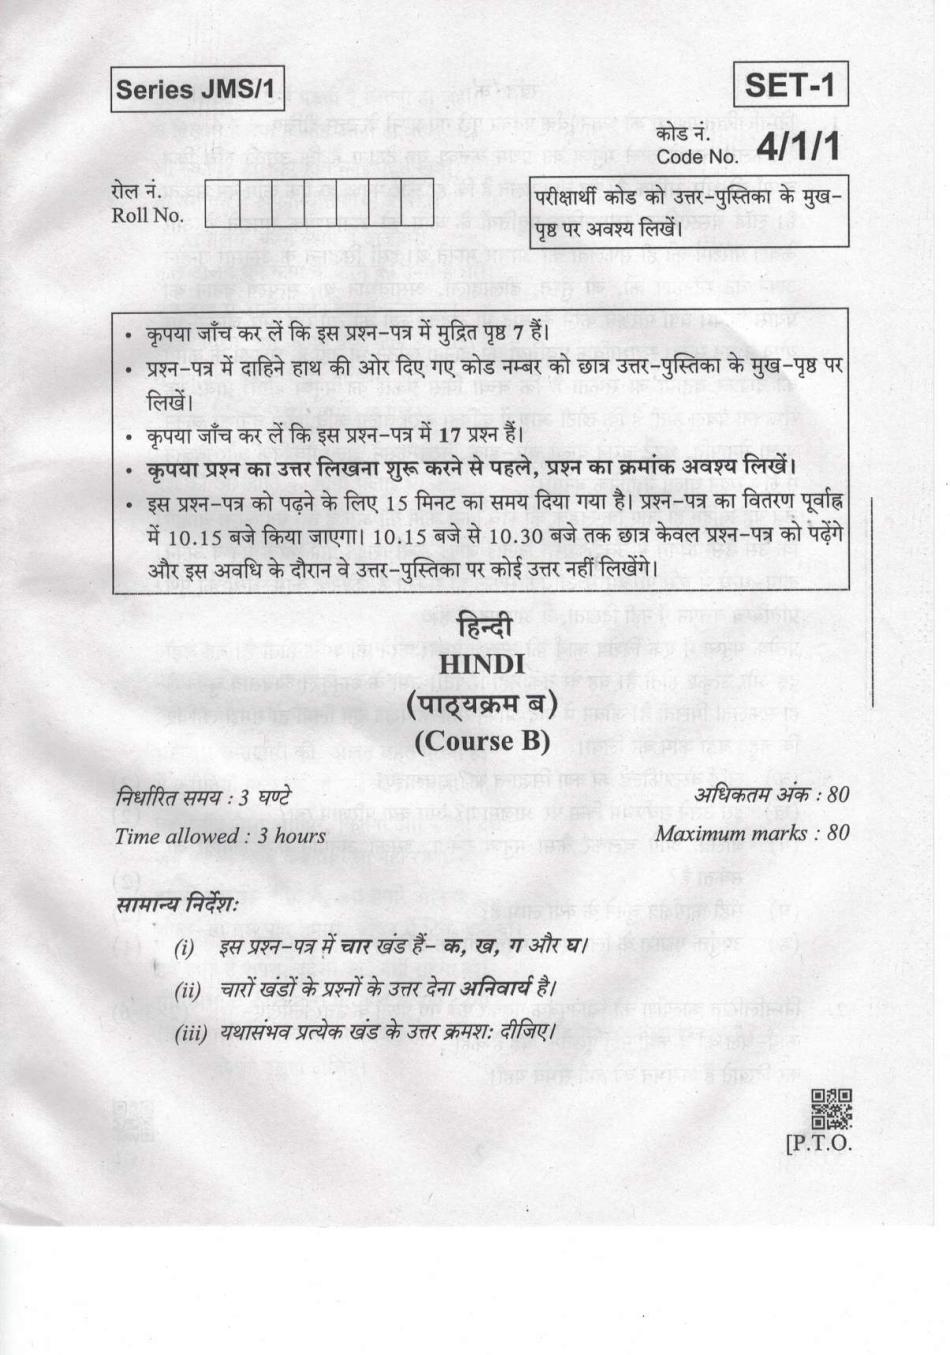 CBSE Class 10 Hindi Course B Question Paper 2019 Set 1 - Page 1